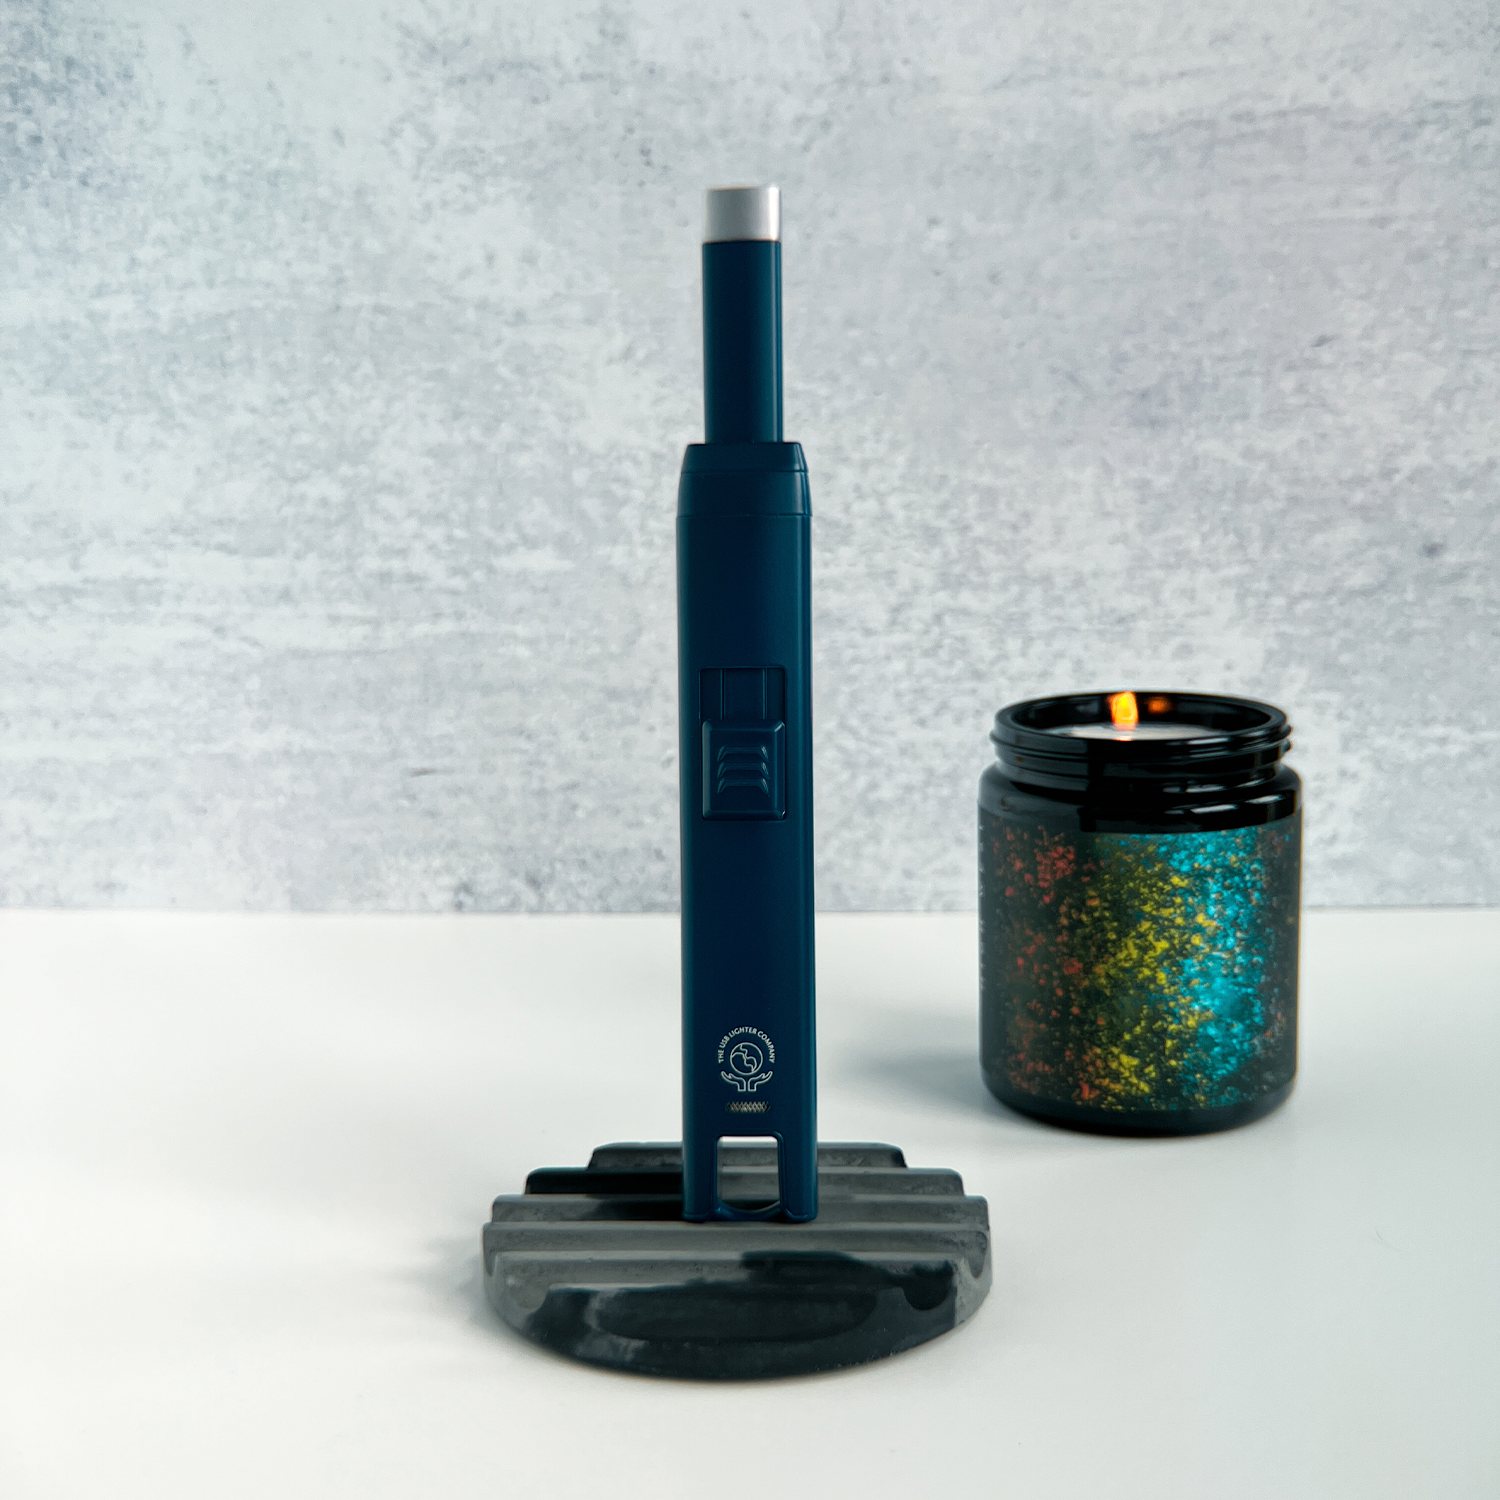 THE ARC Electric Candle Lighter Matte Blue rechargeable & eco-friendly